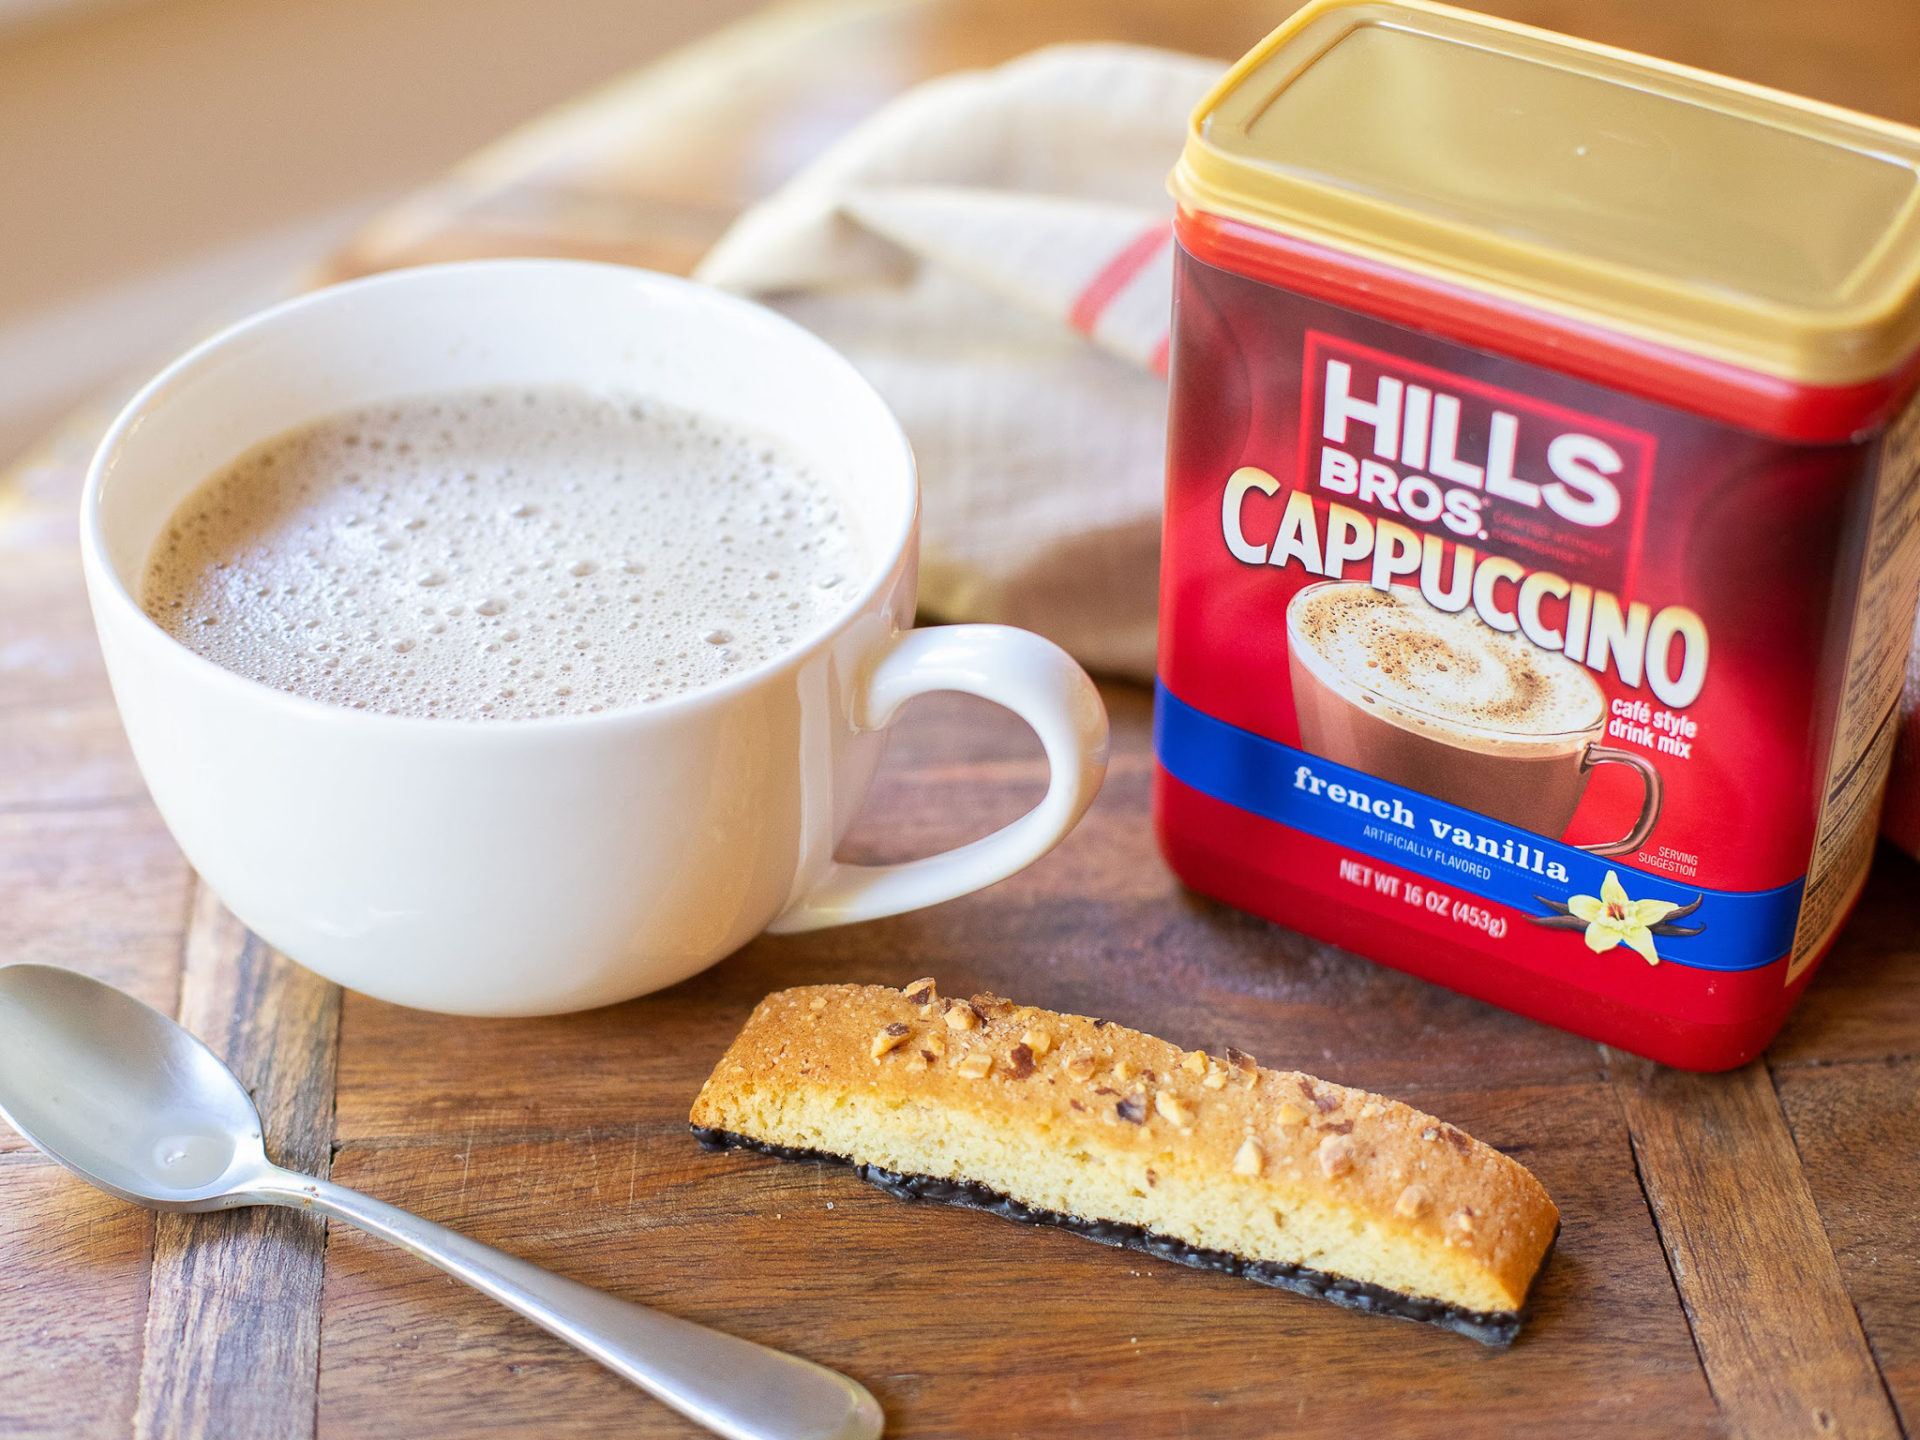 Nice Discount On Hills Bros Cappuccino Drink Mix At Kroger